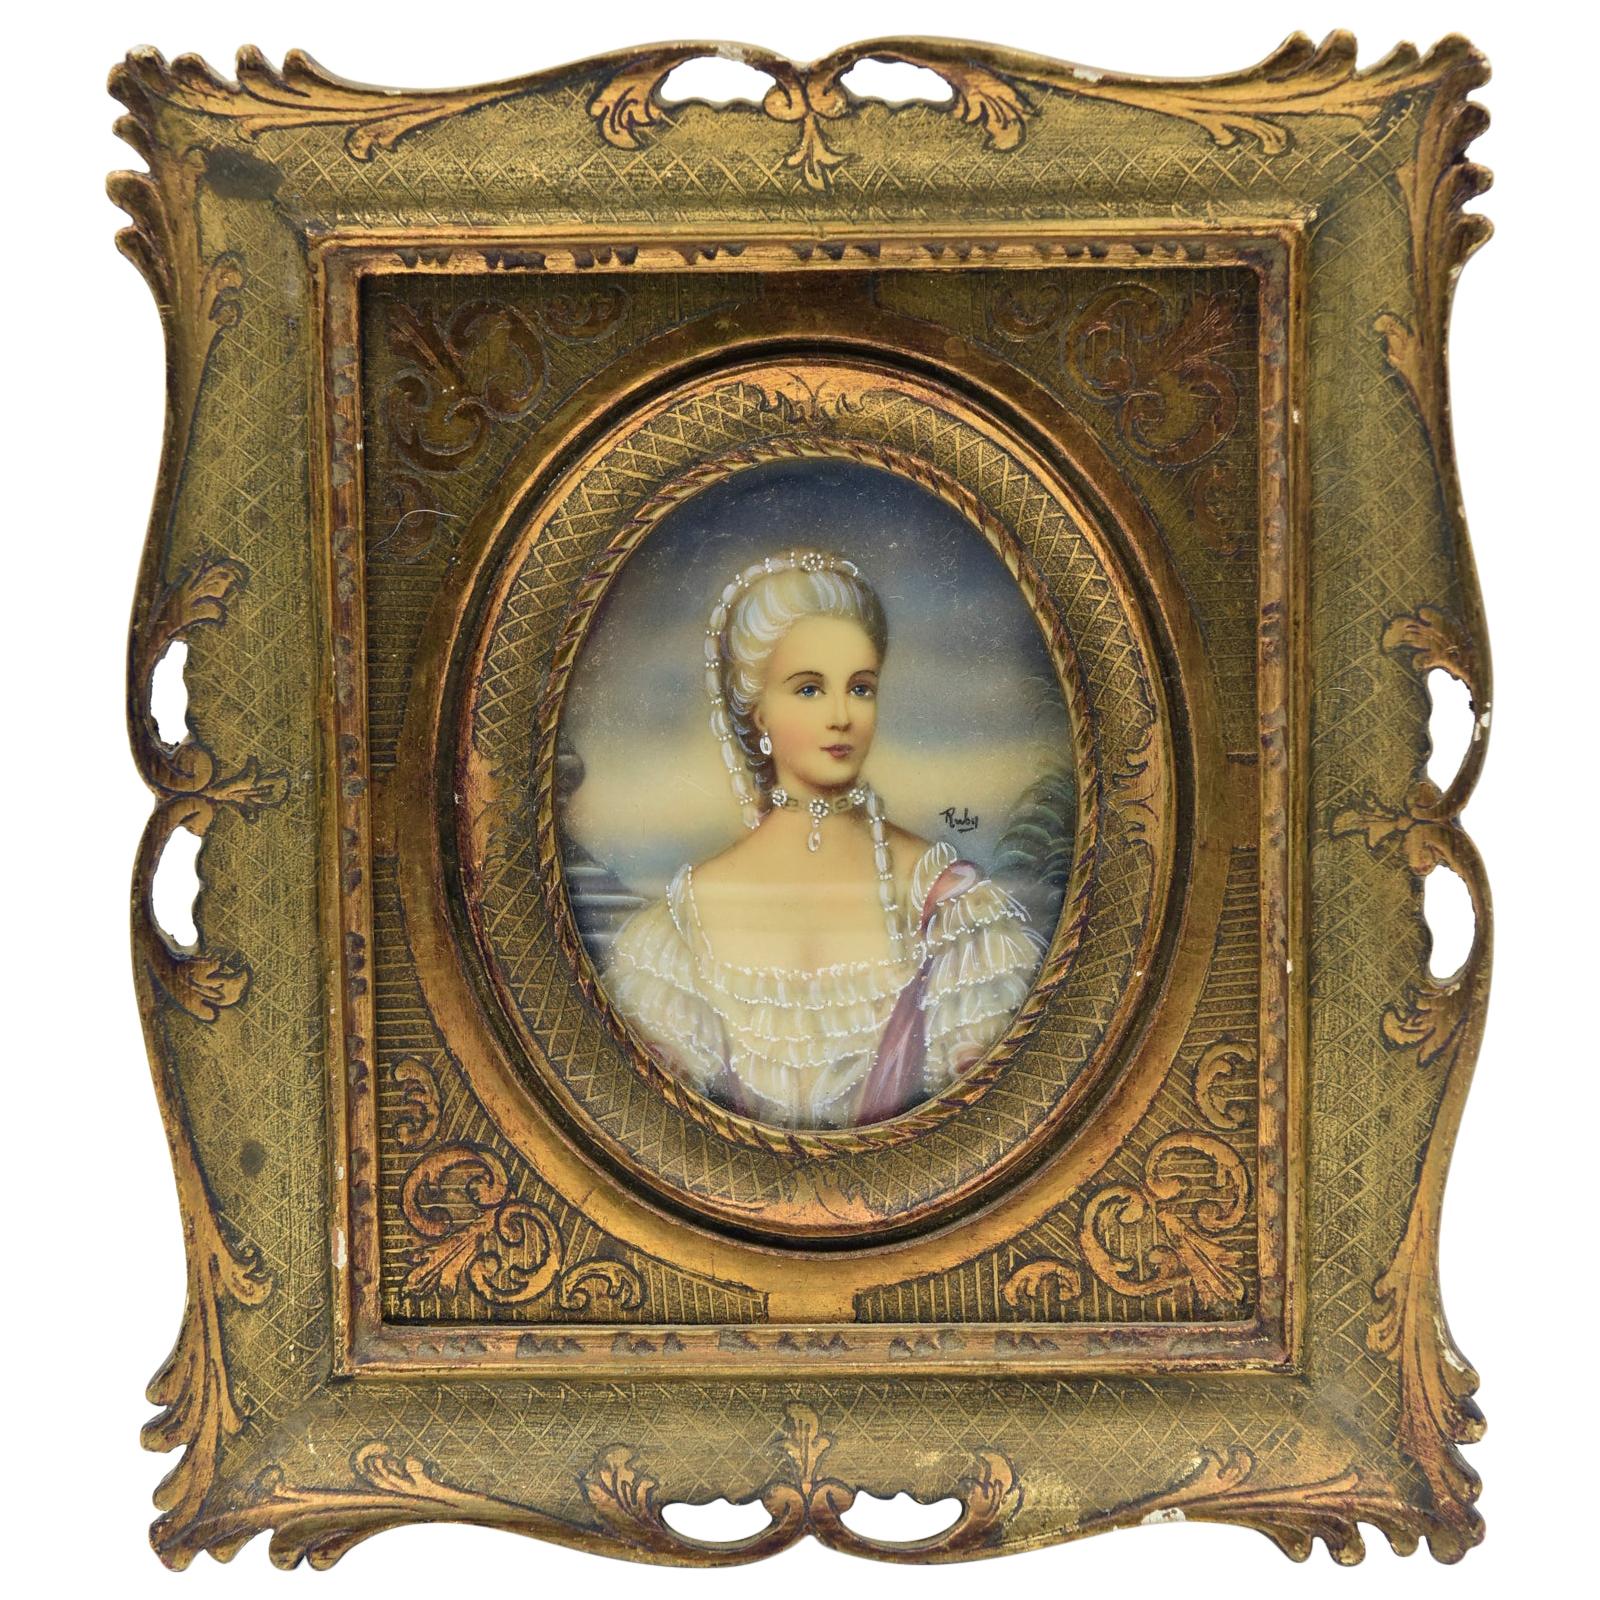 Miniature Lady Portrait by Ruby Hand Painted on Celluloid in Giltwood Frame